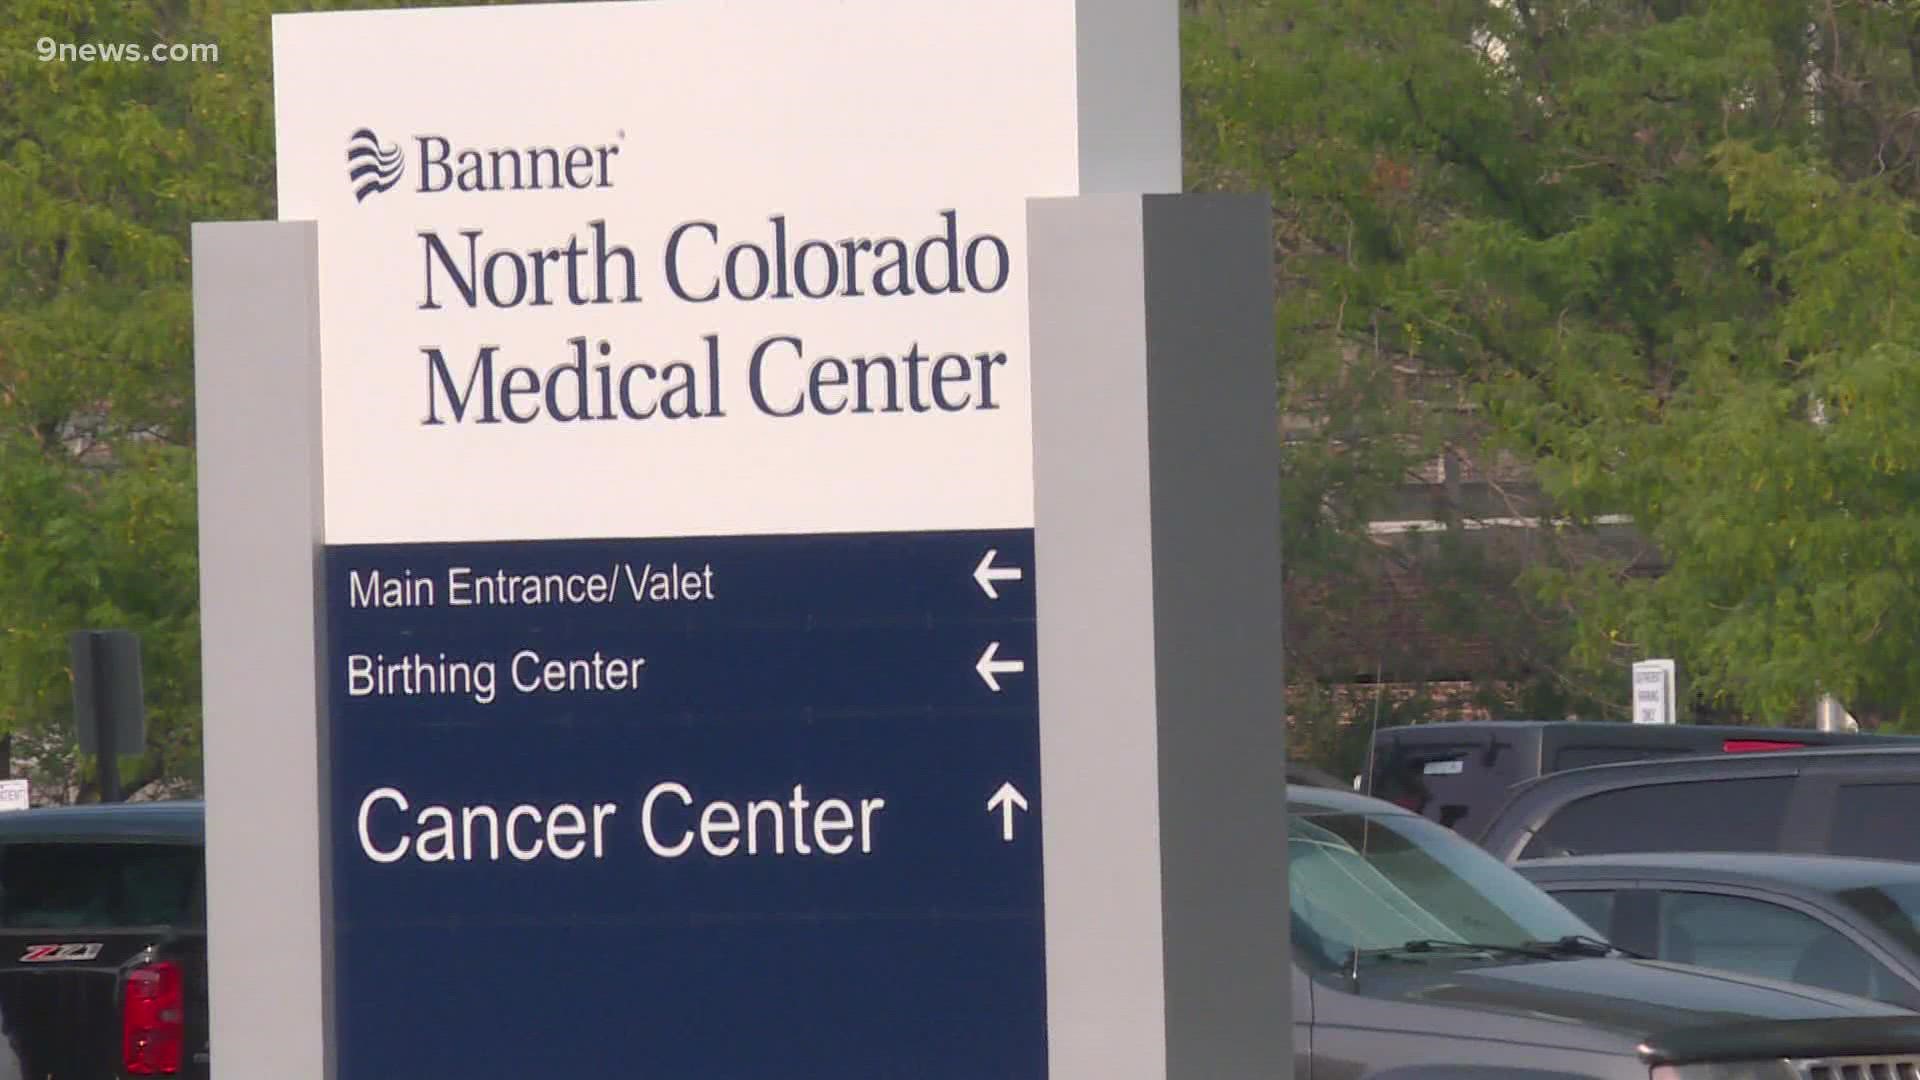 Hospitals in Larimer, Weld counties are overwhelmed – it's not just Coloradans filling the beds, some are getting COVID patients from Wyoming too.